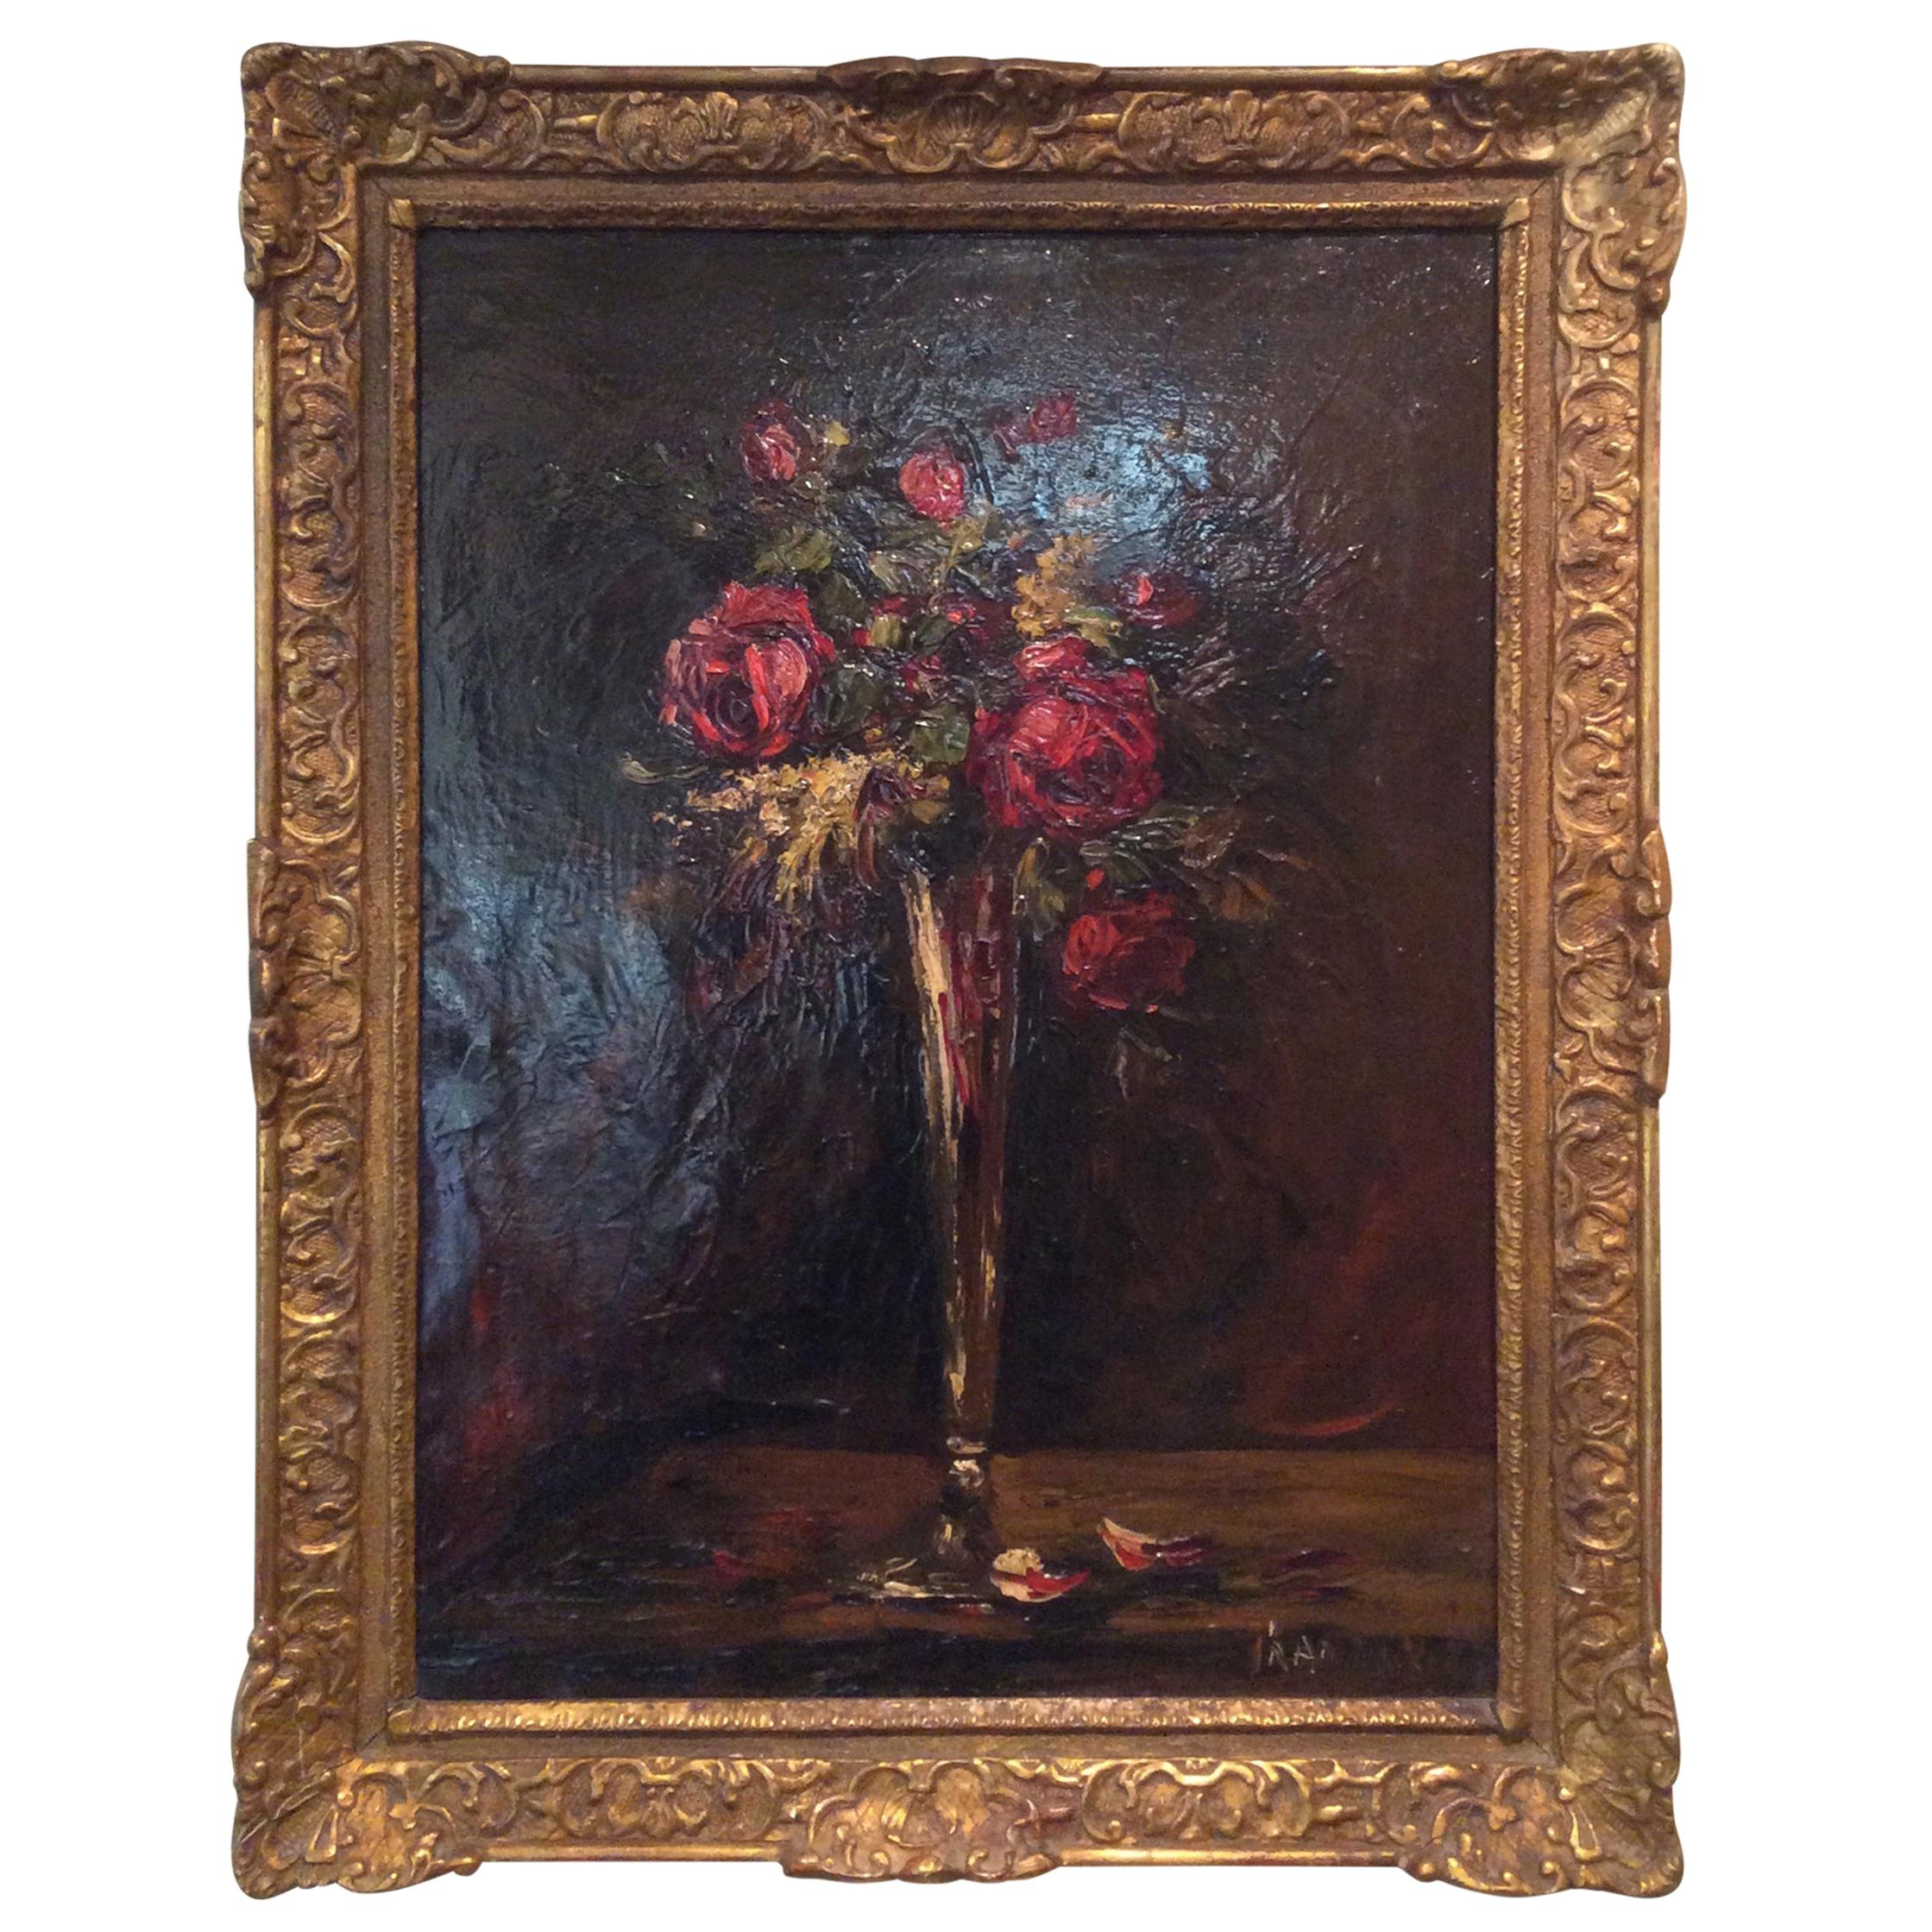 French Still Life Floral Painting by Charles Franzini d’Issoncourt